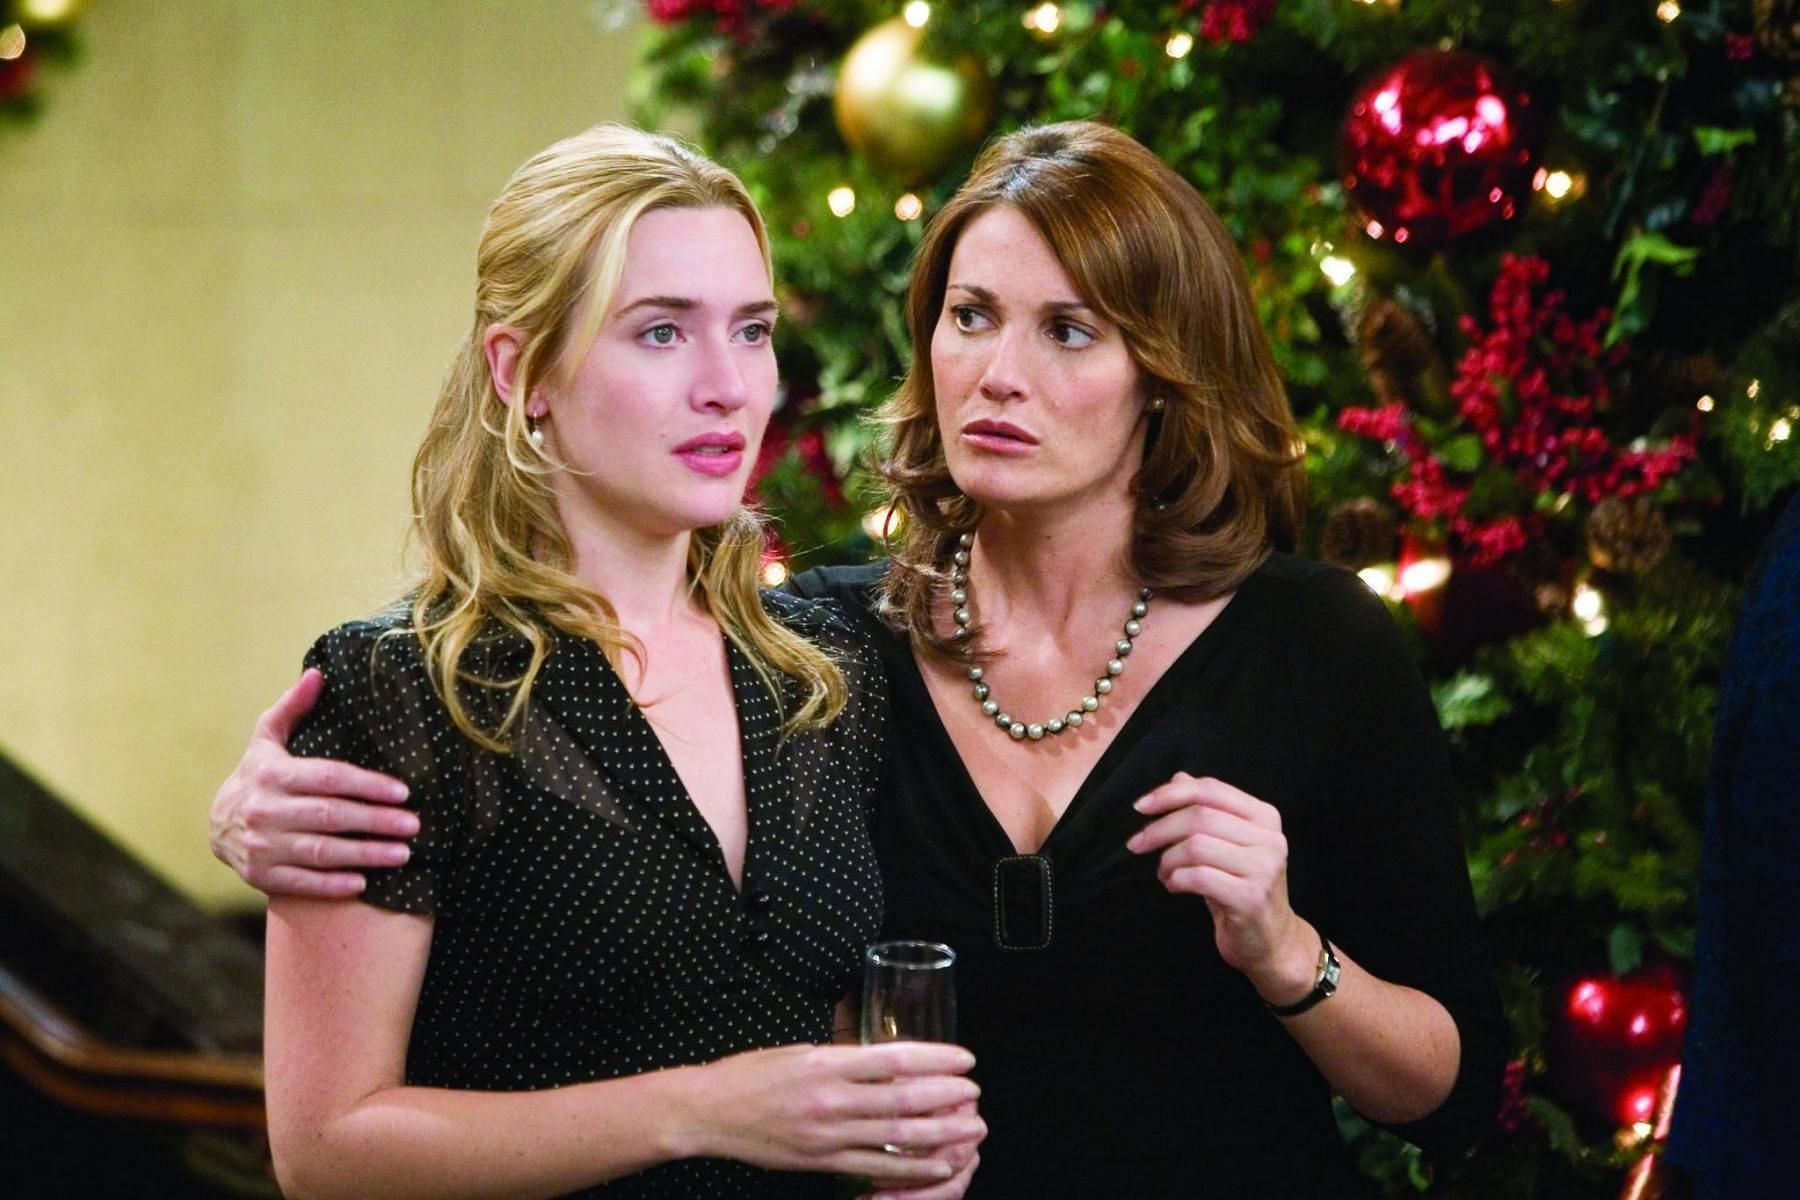 A scene from The Holiday. (Photo via YouTube/Sony Pictures Entertainment)